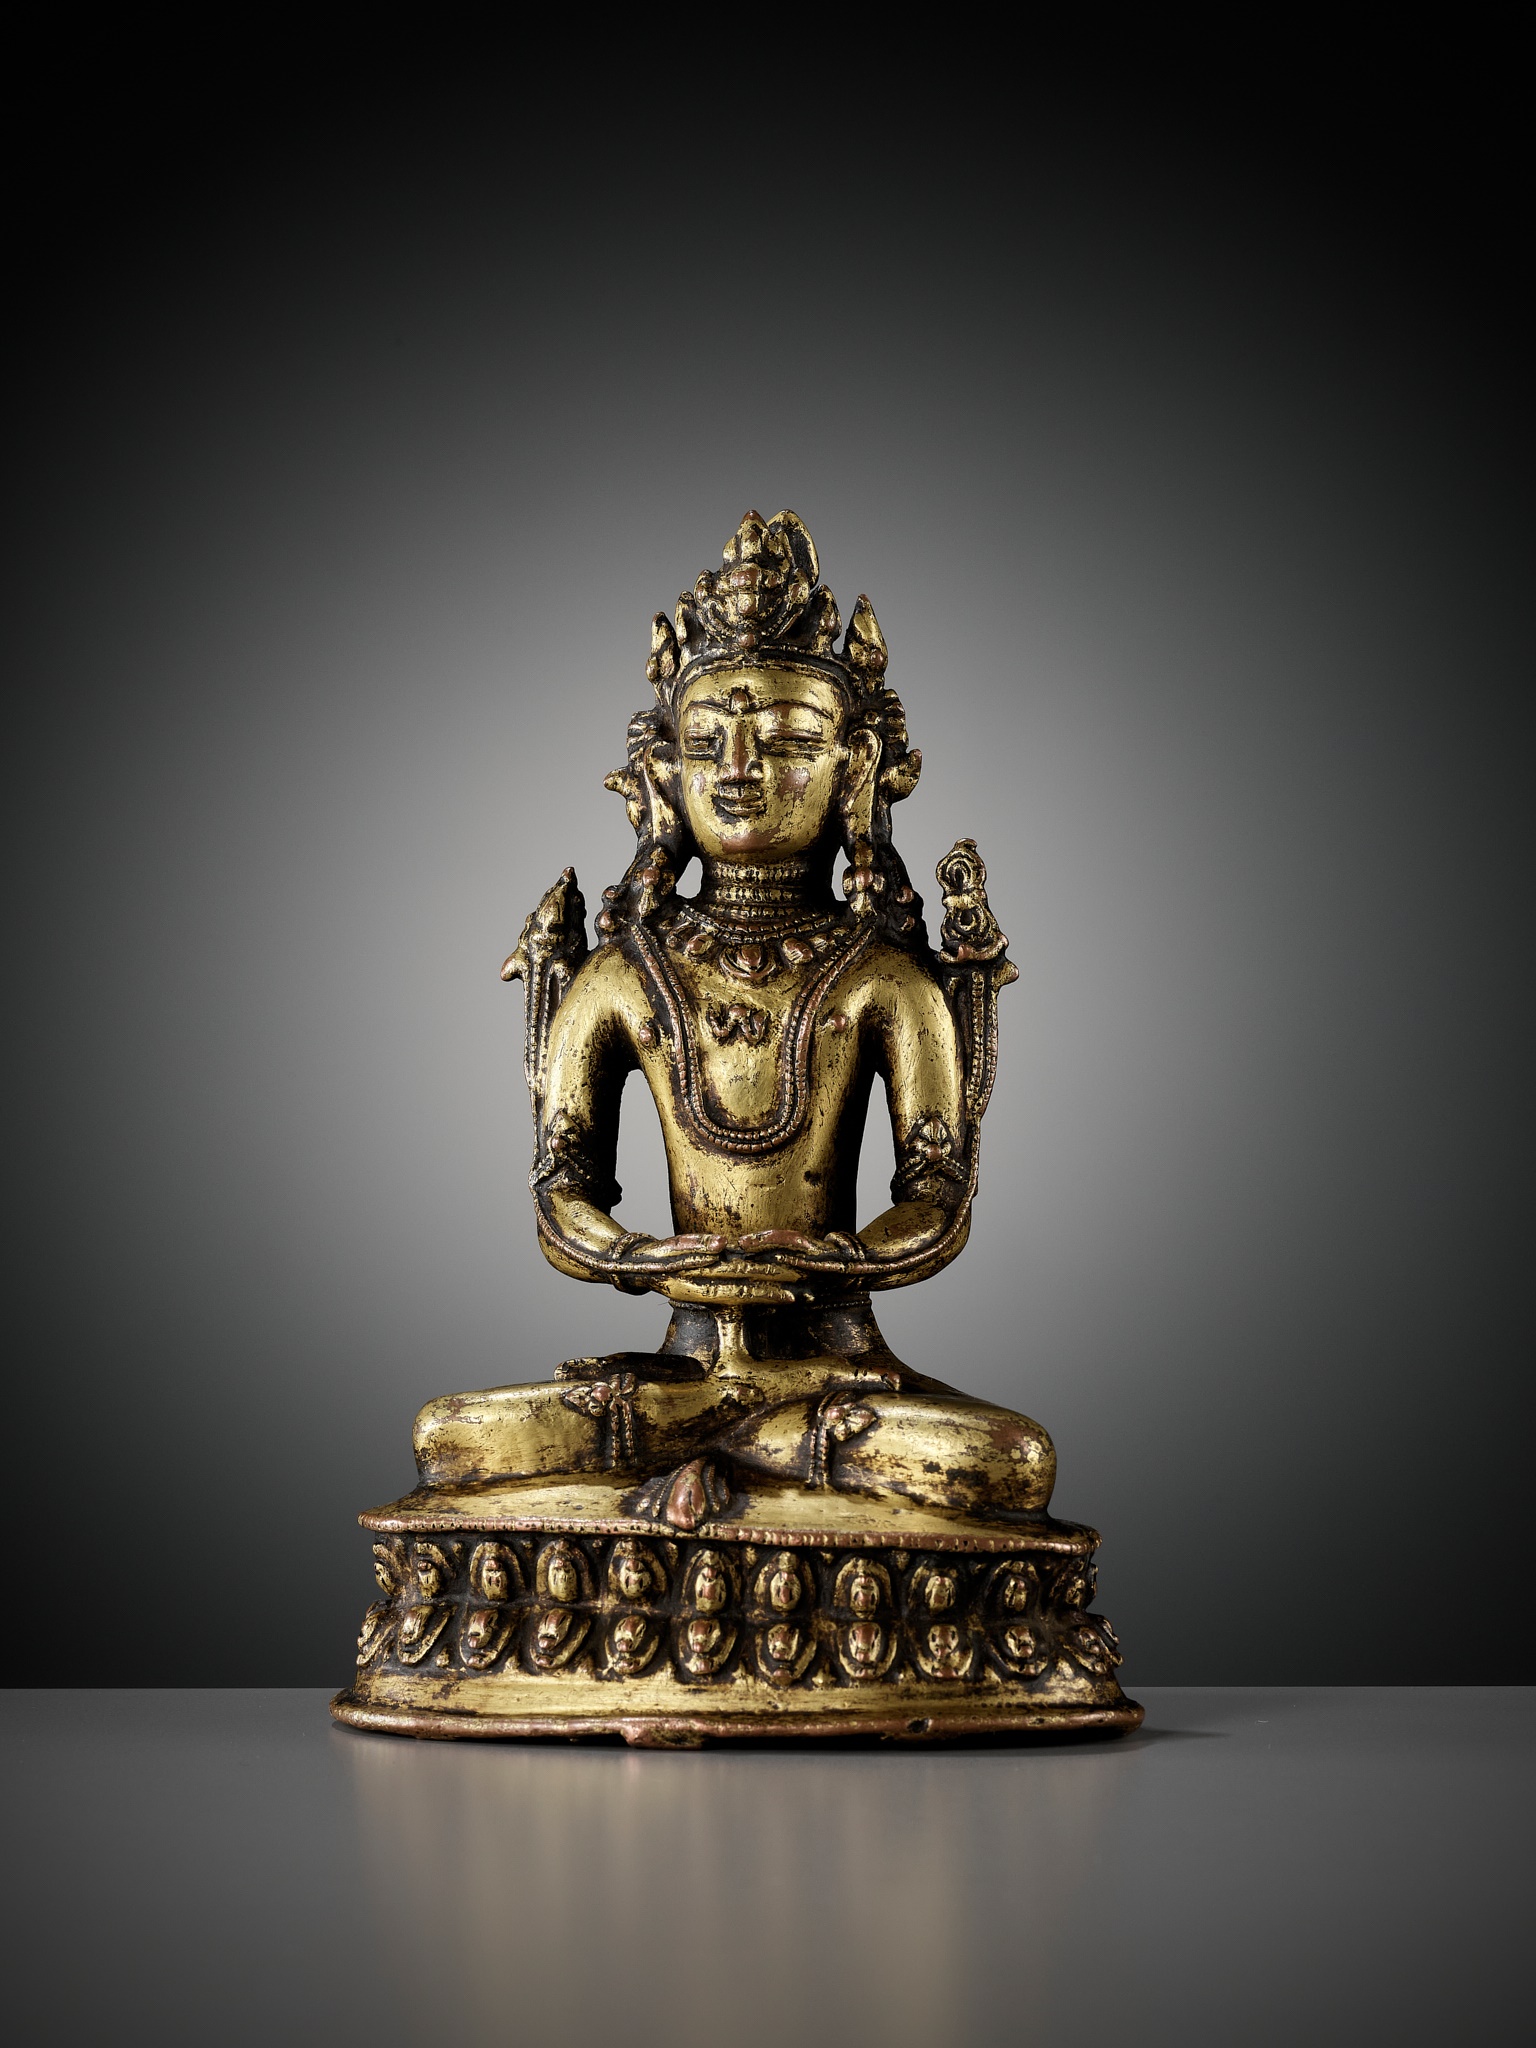 A GILT COPPER-ALLOY FIGURE OF KUNZANG AKOR, BON TRADITION, TIBET, 14TH-15TH CENTURY - Image 3 of 13